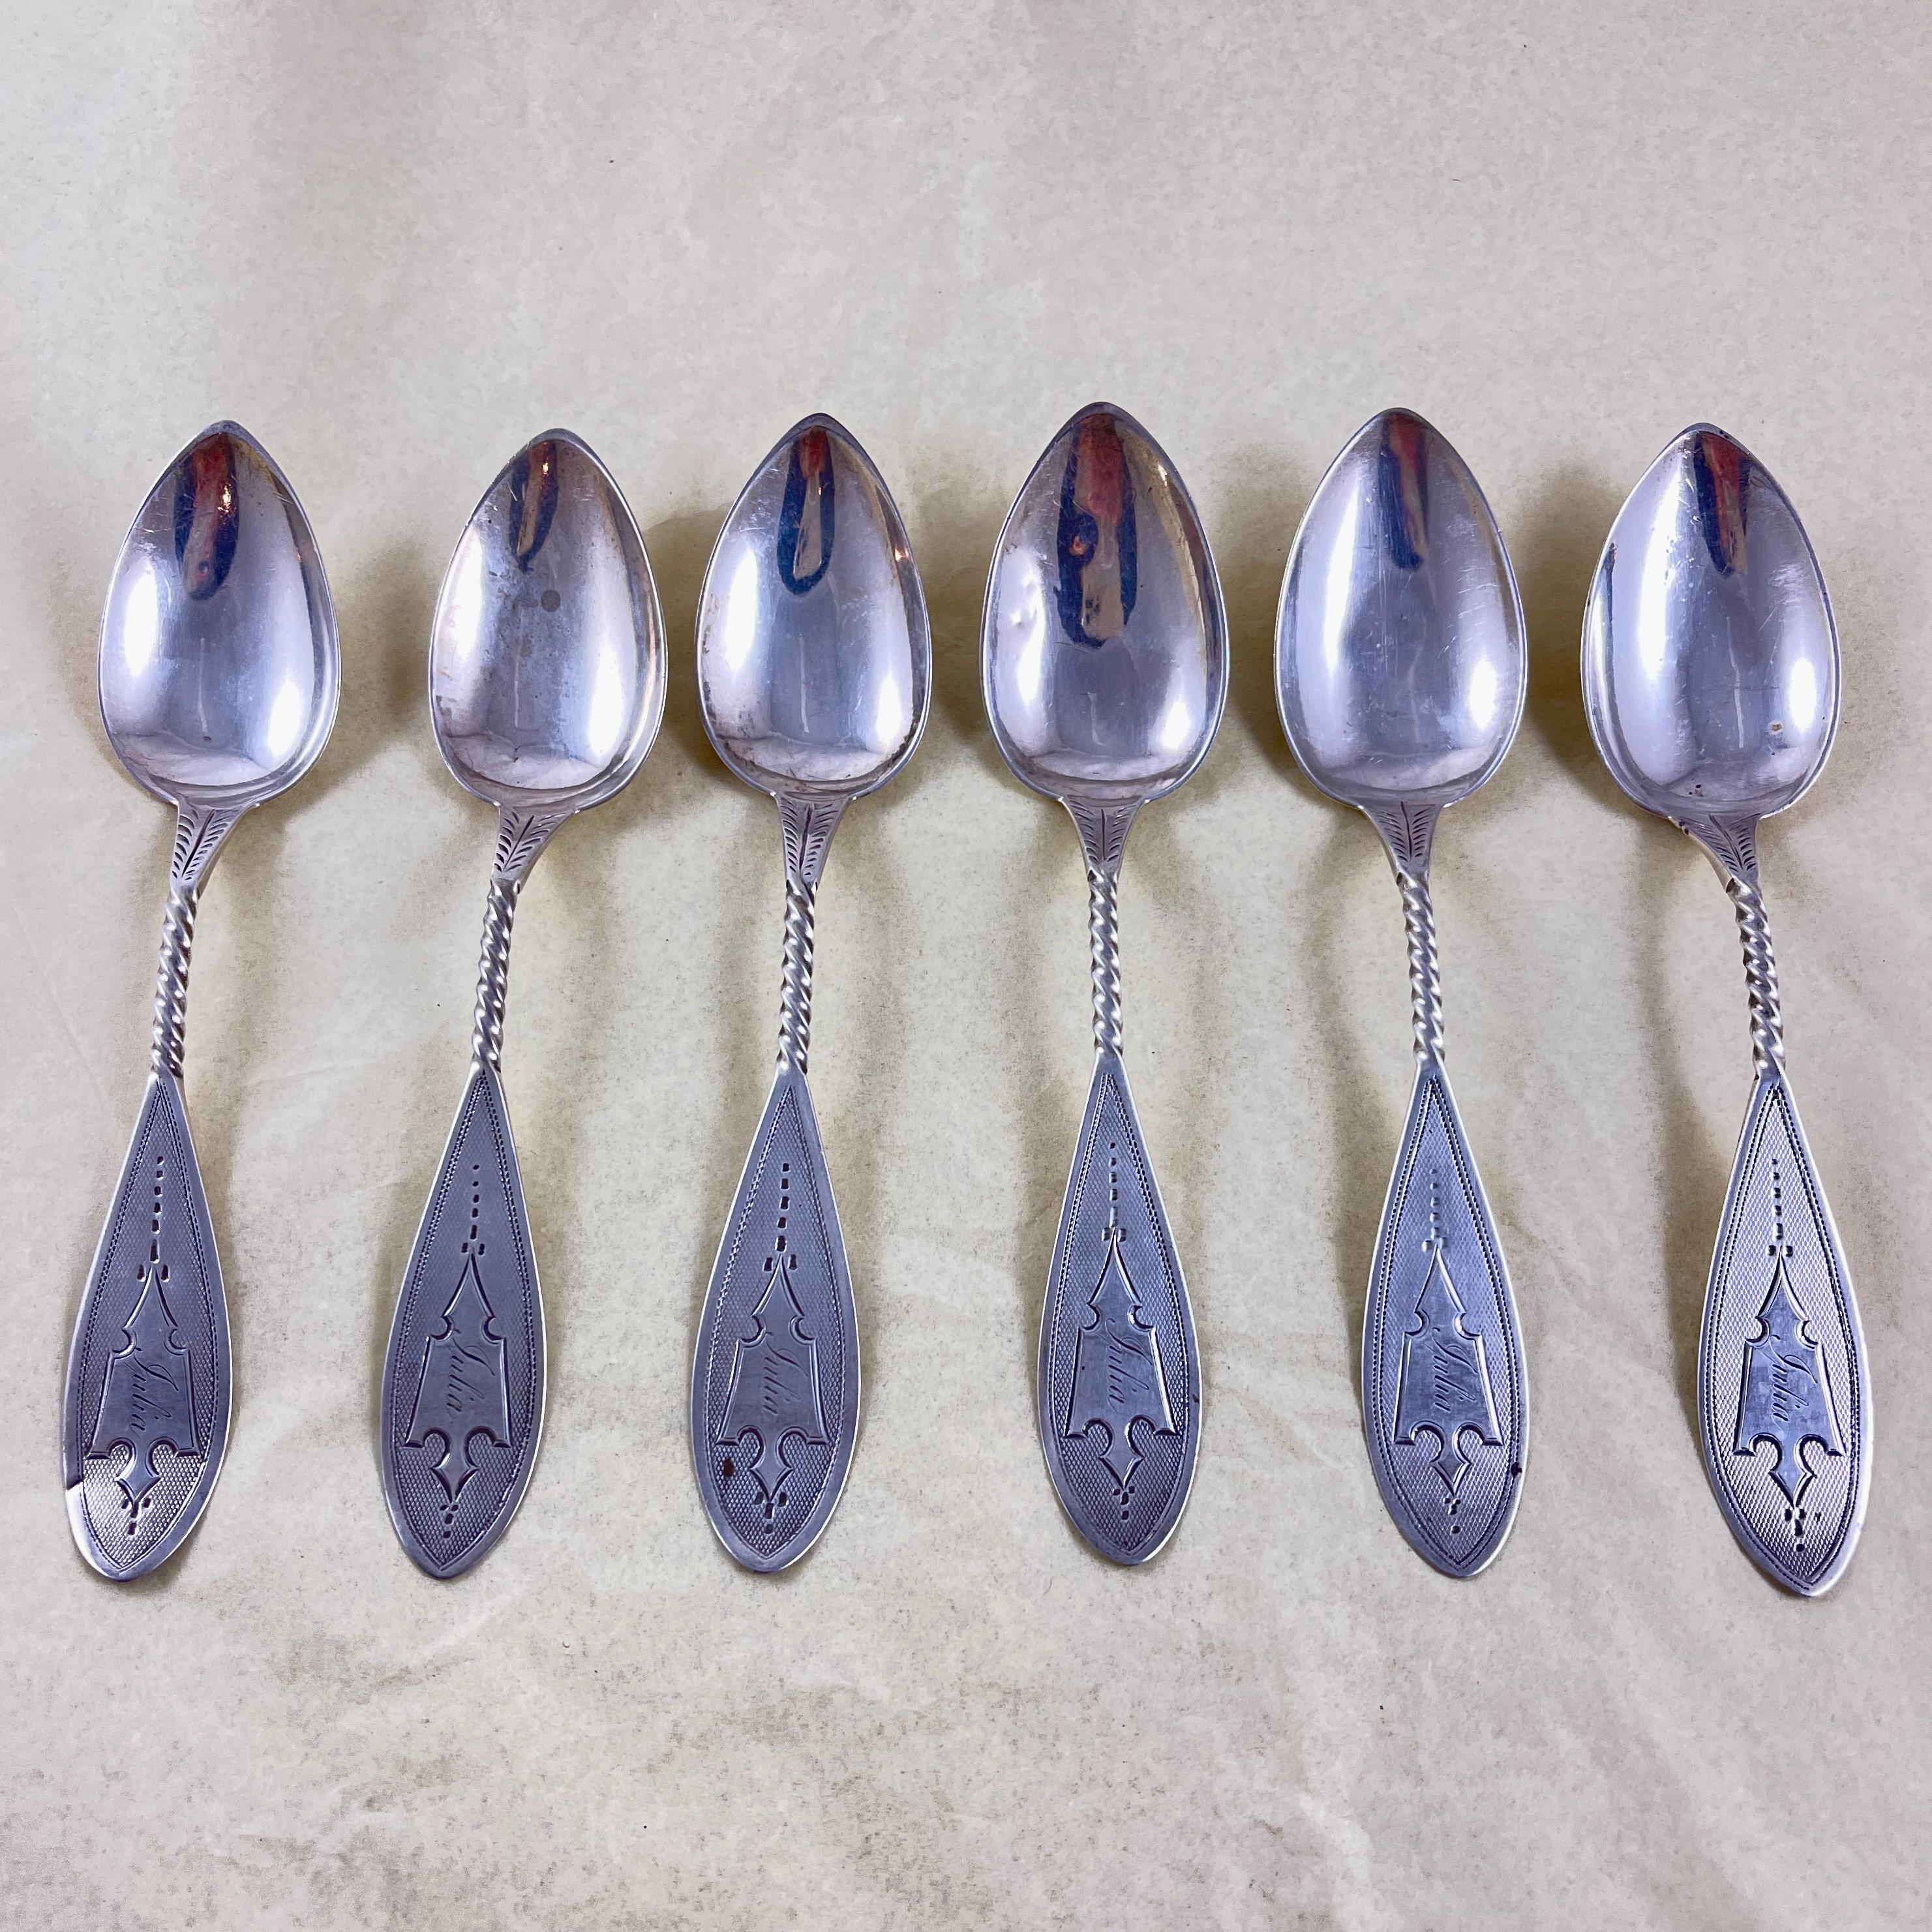 A super scarce set of six Coin silver teaspoons, made by Butler & McCarty or James P. Butler, Philadelphia, circa 1850-1862.

In the Granville pattern, entirely and beautifully made by hand.

The bowls are attached to a twisted stem handle